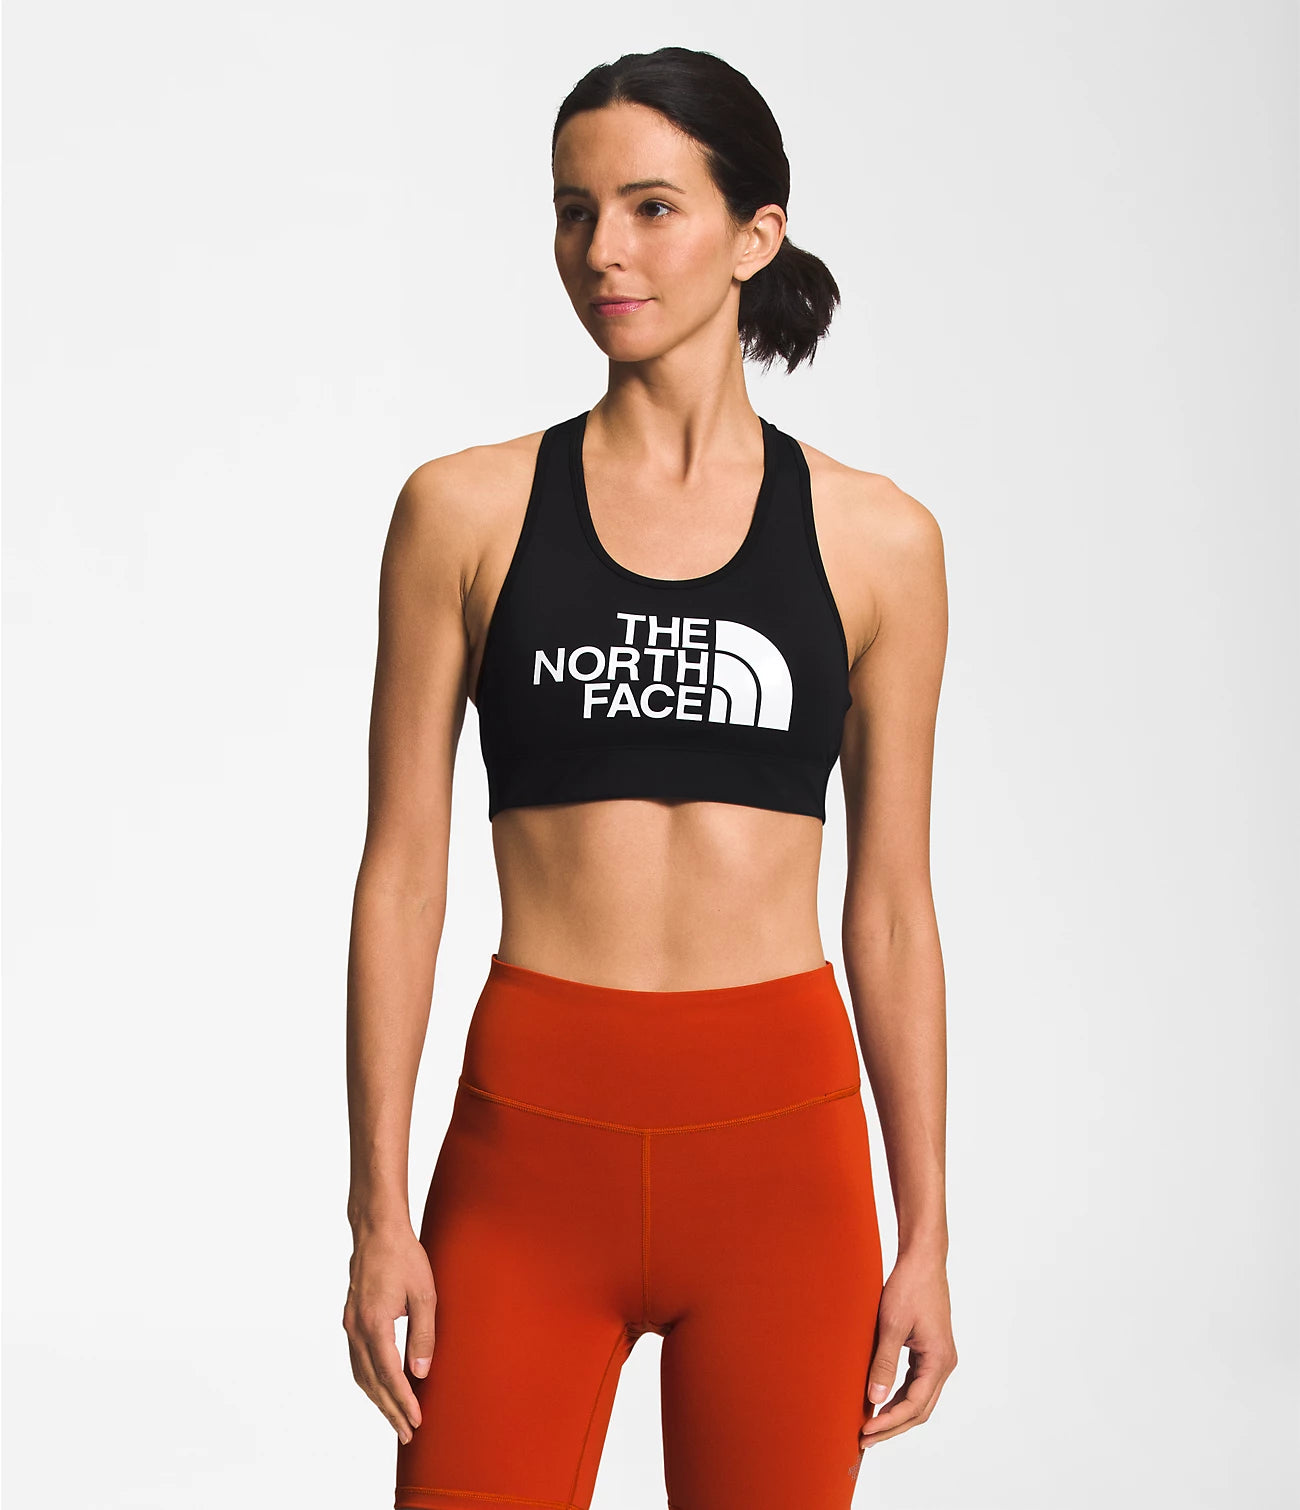 Black Elevation Sports Bra by The North Face on Sale